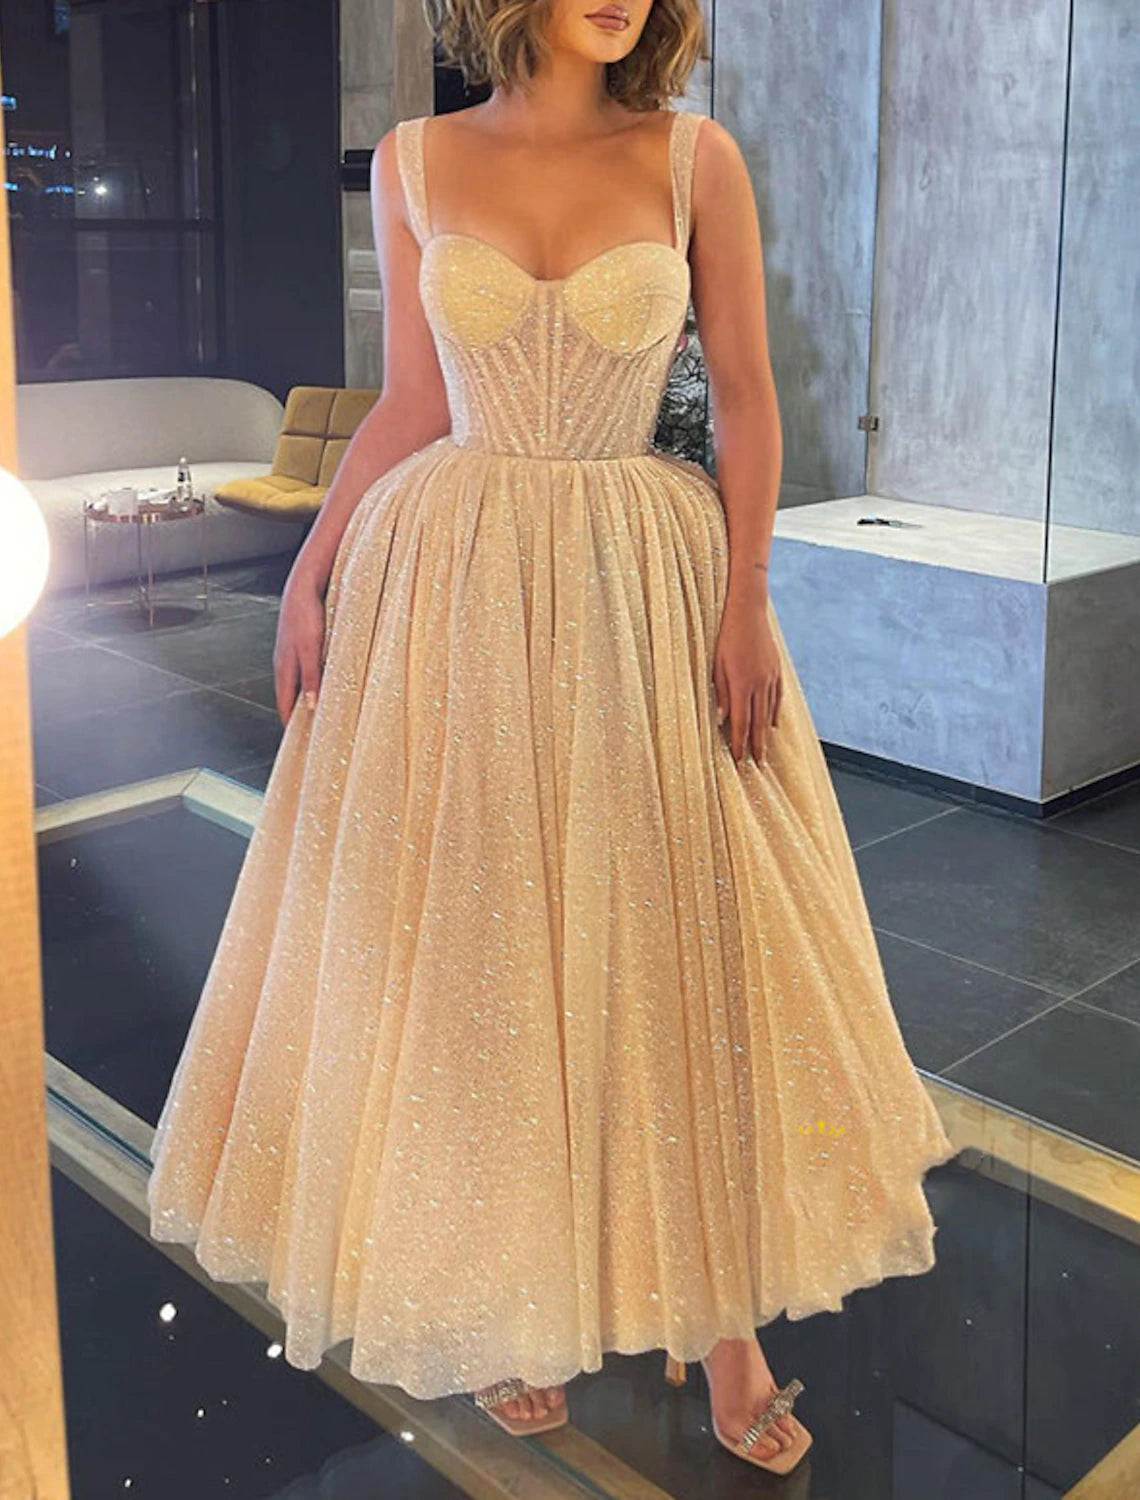 Ball Gown Prom Dresses Corsets Dress Wedding Party Dress Birthday Ankle Length Sleeveless Spaghetti Strap Tulle with Glitter Sequin